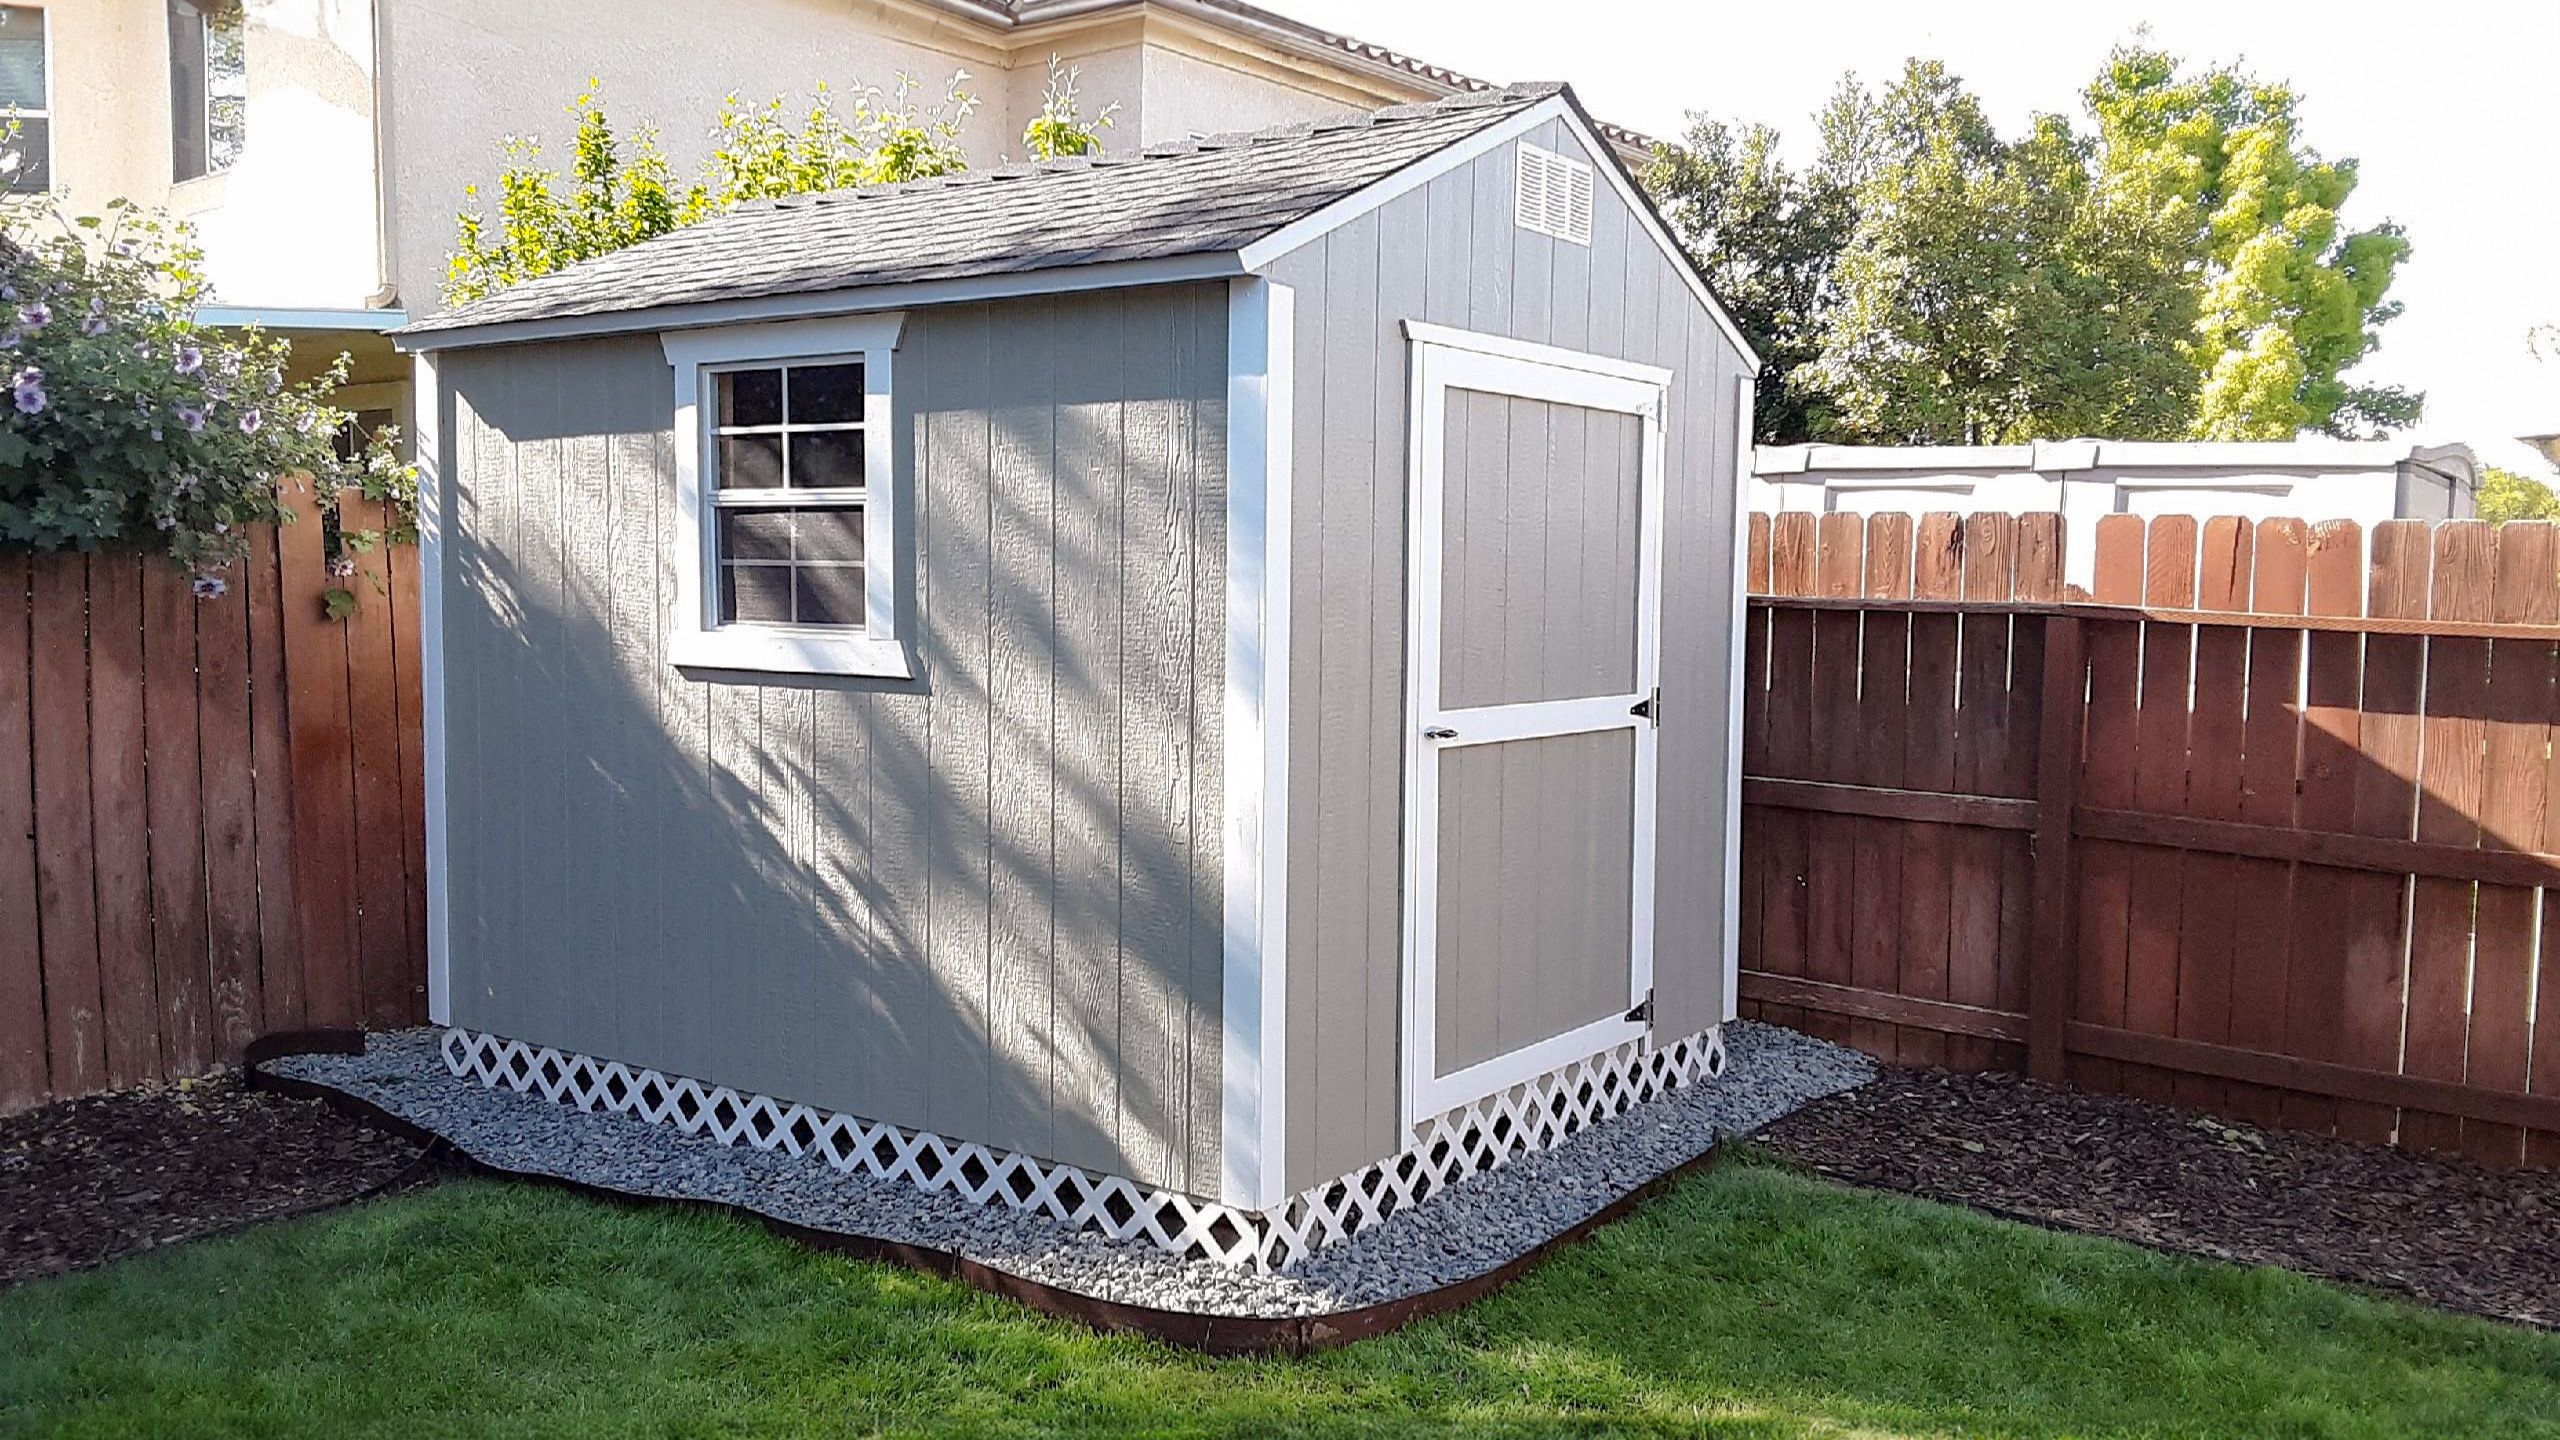 Gray Rancher outdoor storage shed in backyard